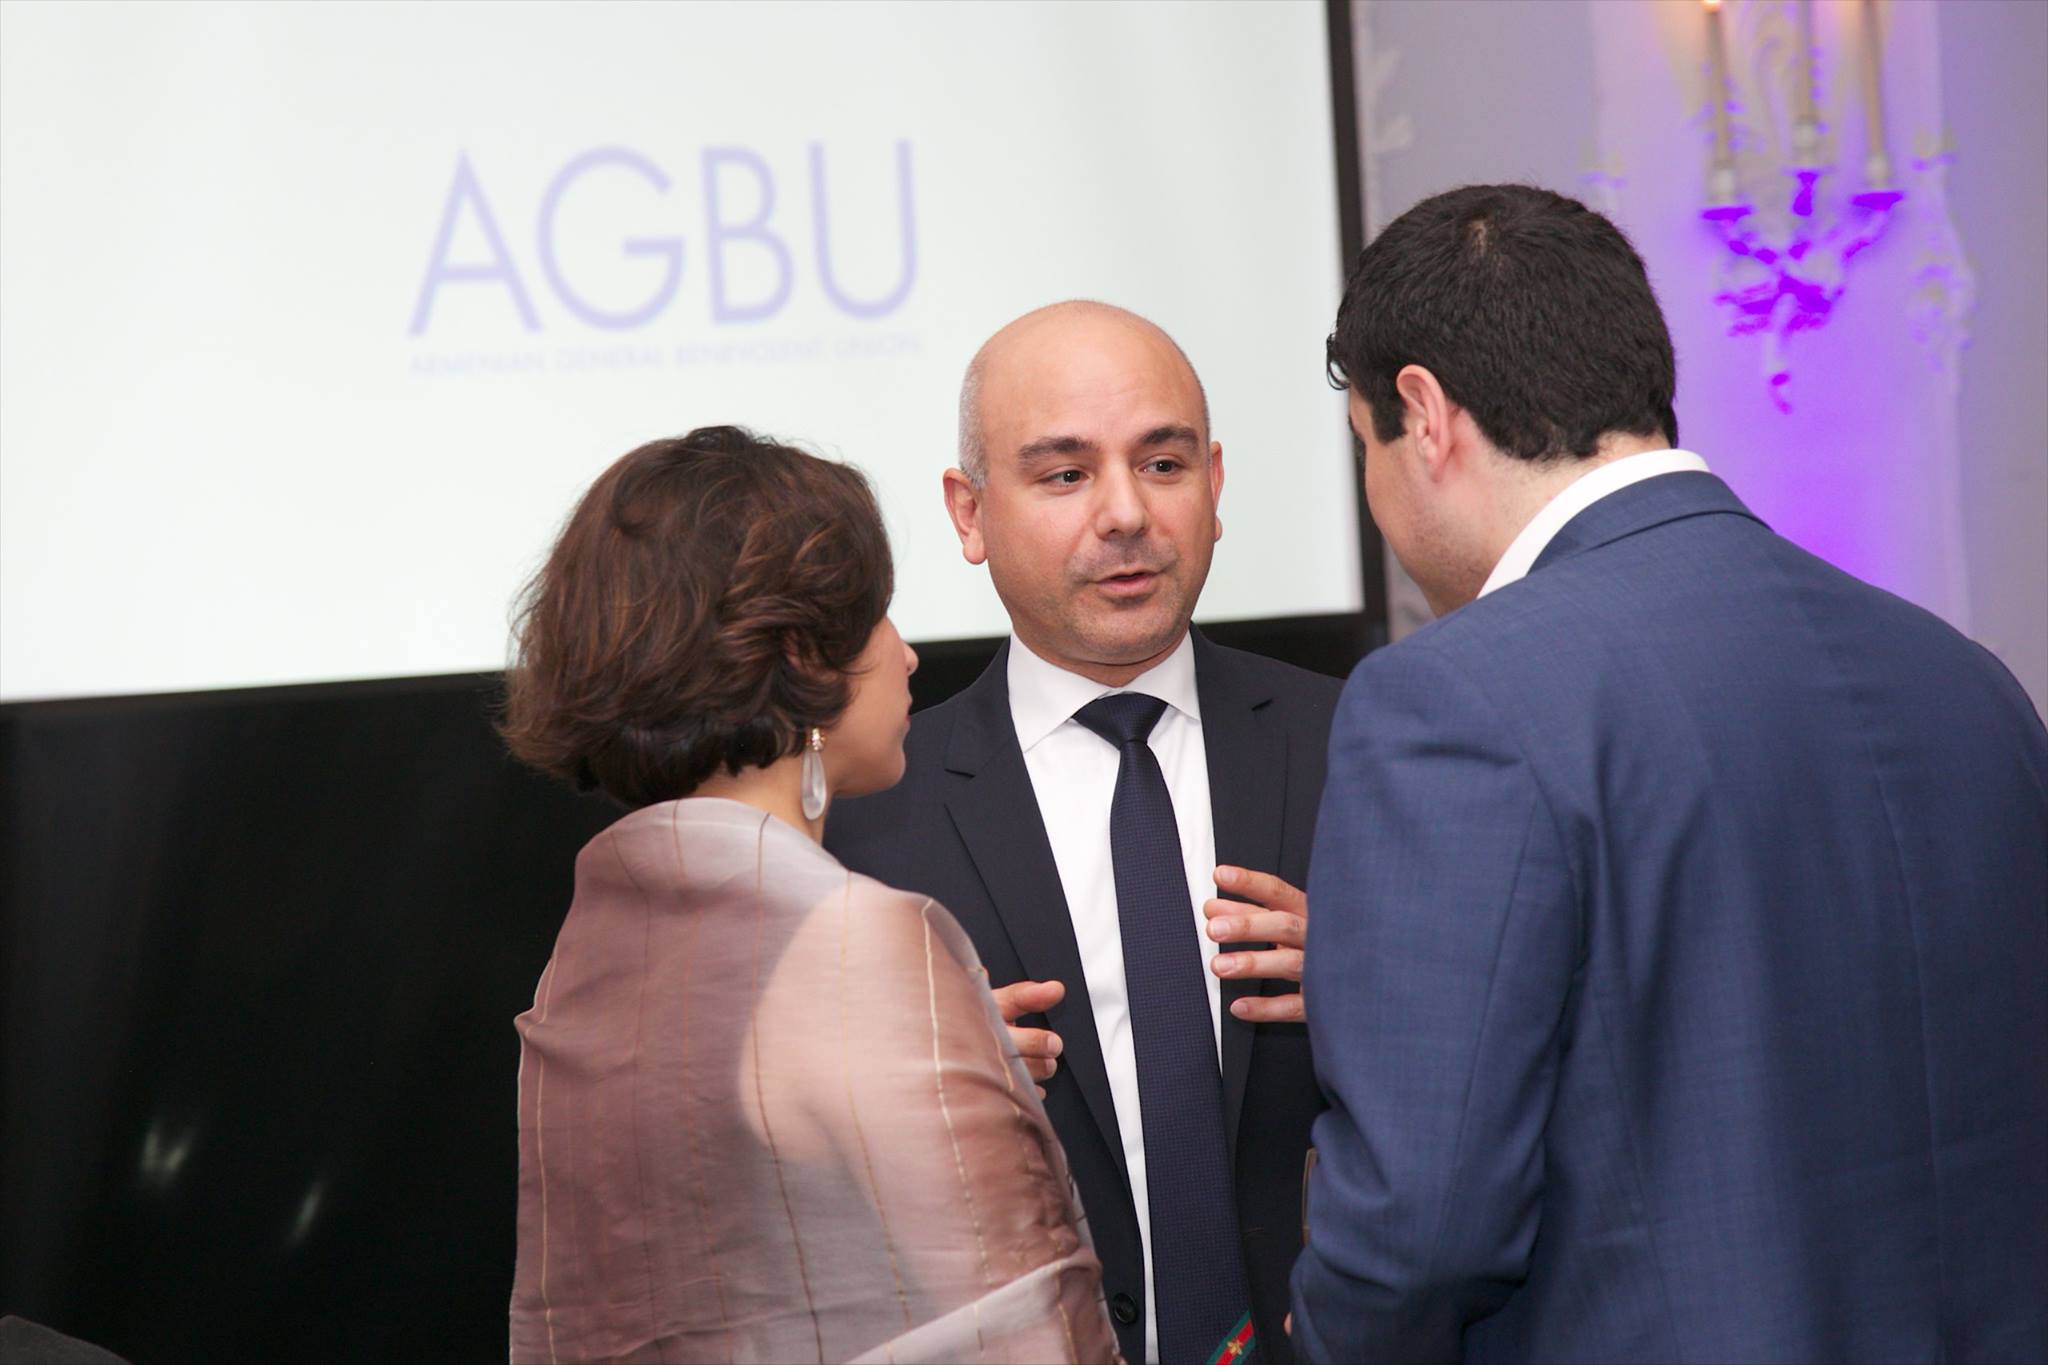 The AGBU Central Board Emphasizes its Youth in a Series of Strategic Meetings in London